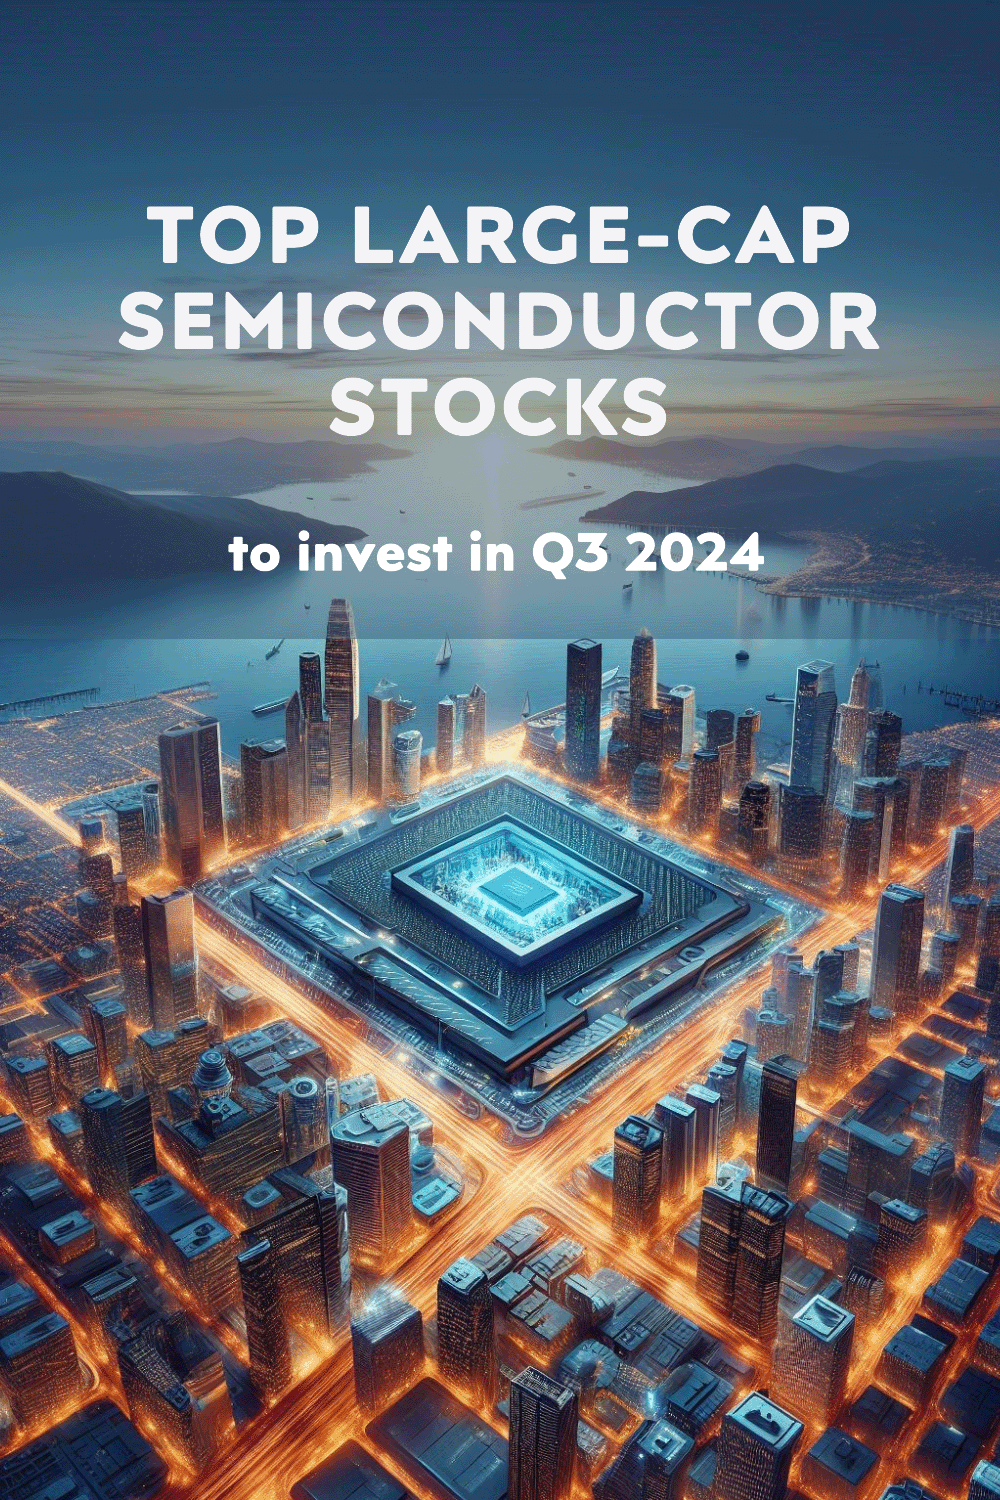 Best large-cap semiconductor stocks to invest in Q3 2024